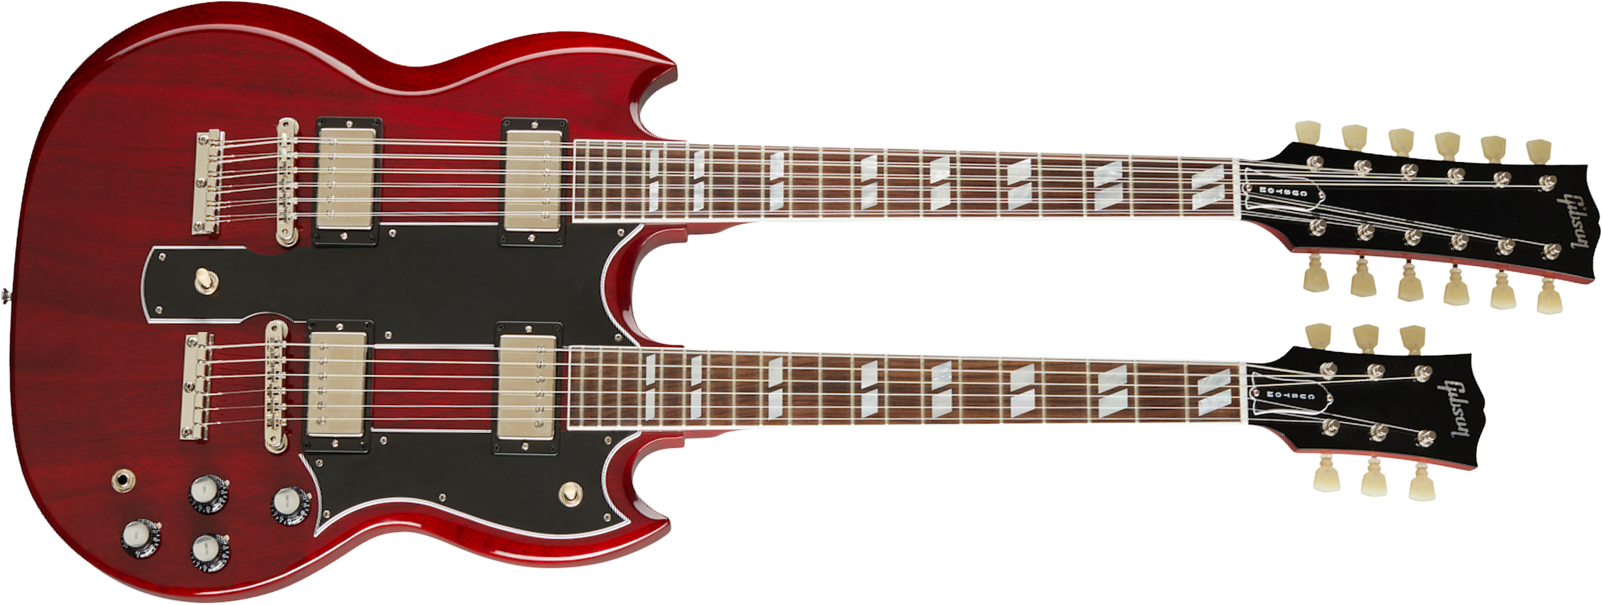 Gibson Custom Shop Eds-1275 Double Neck 2h Ht Rw - Cherry Red - Double neck guitar - Main picture